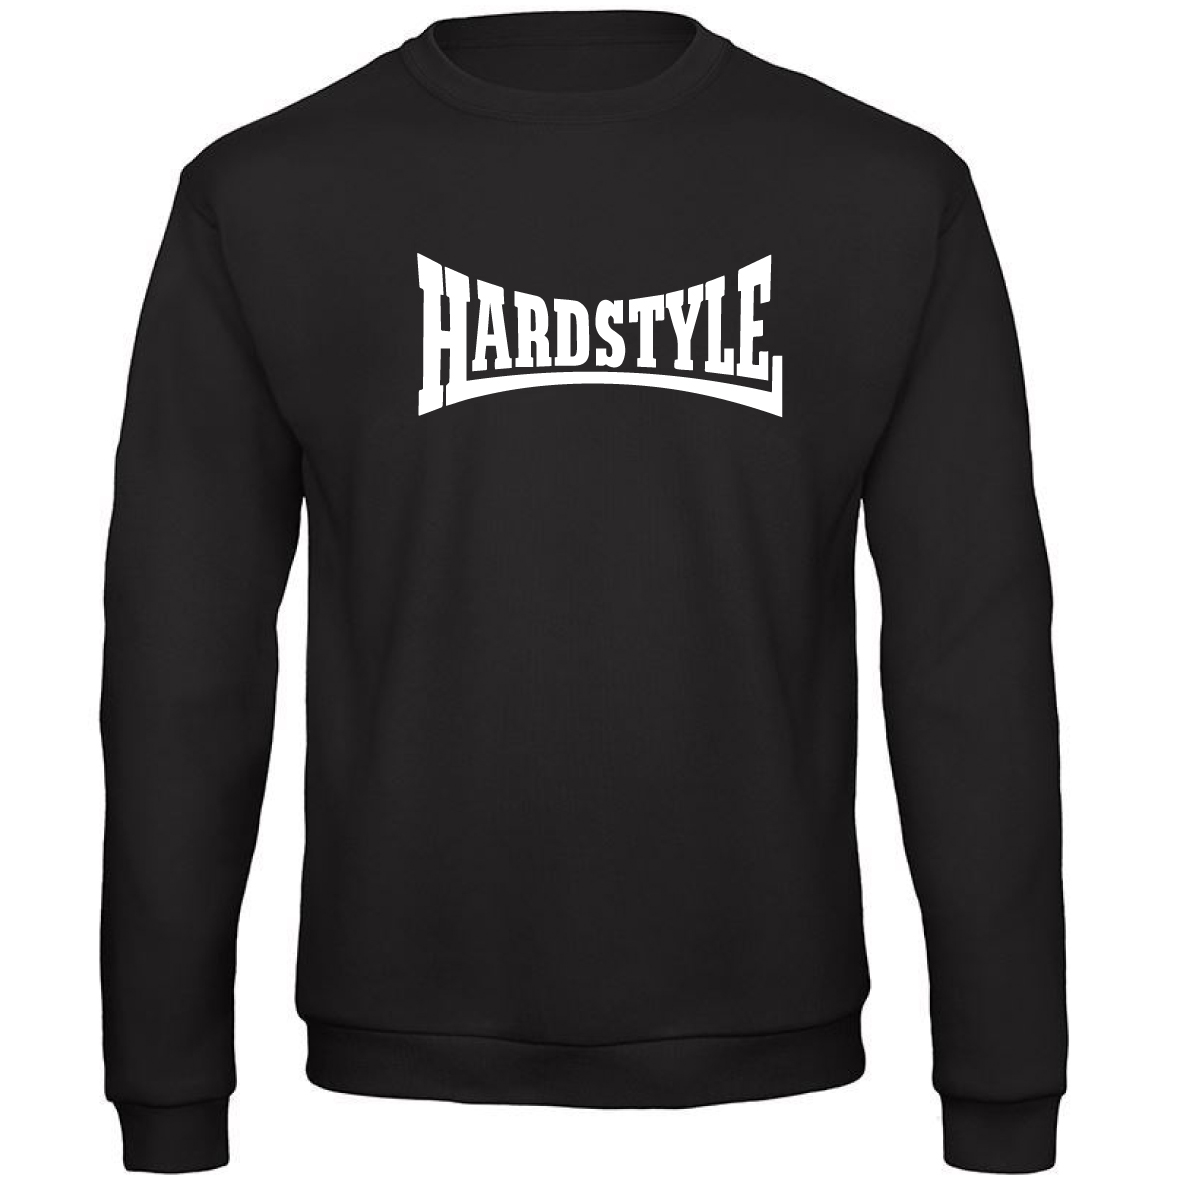 hardstyle sweater classic black